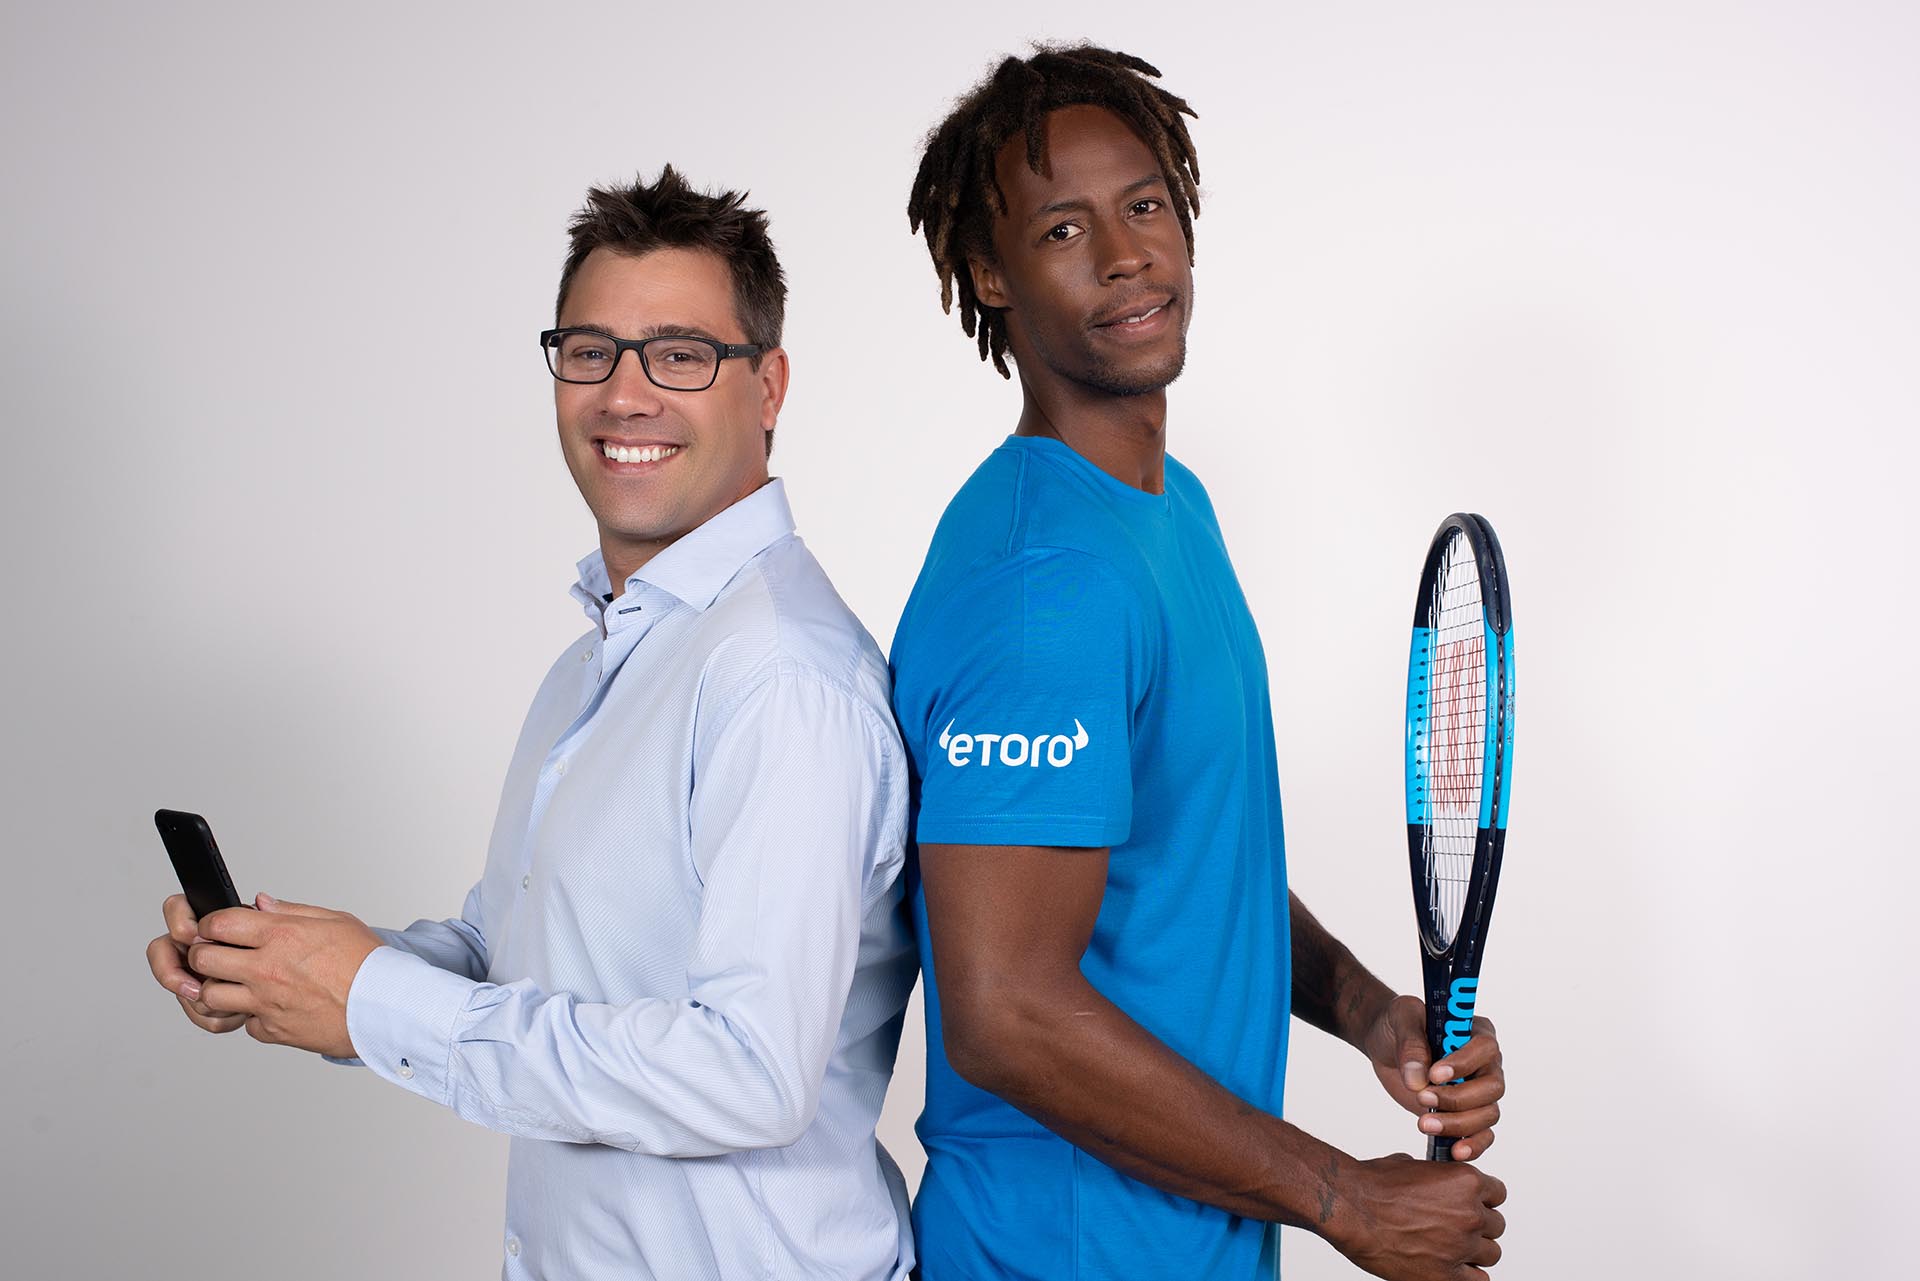 “Get Serious About Investing” with eToro and Gael Monfils